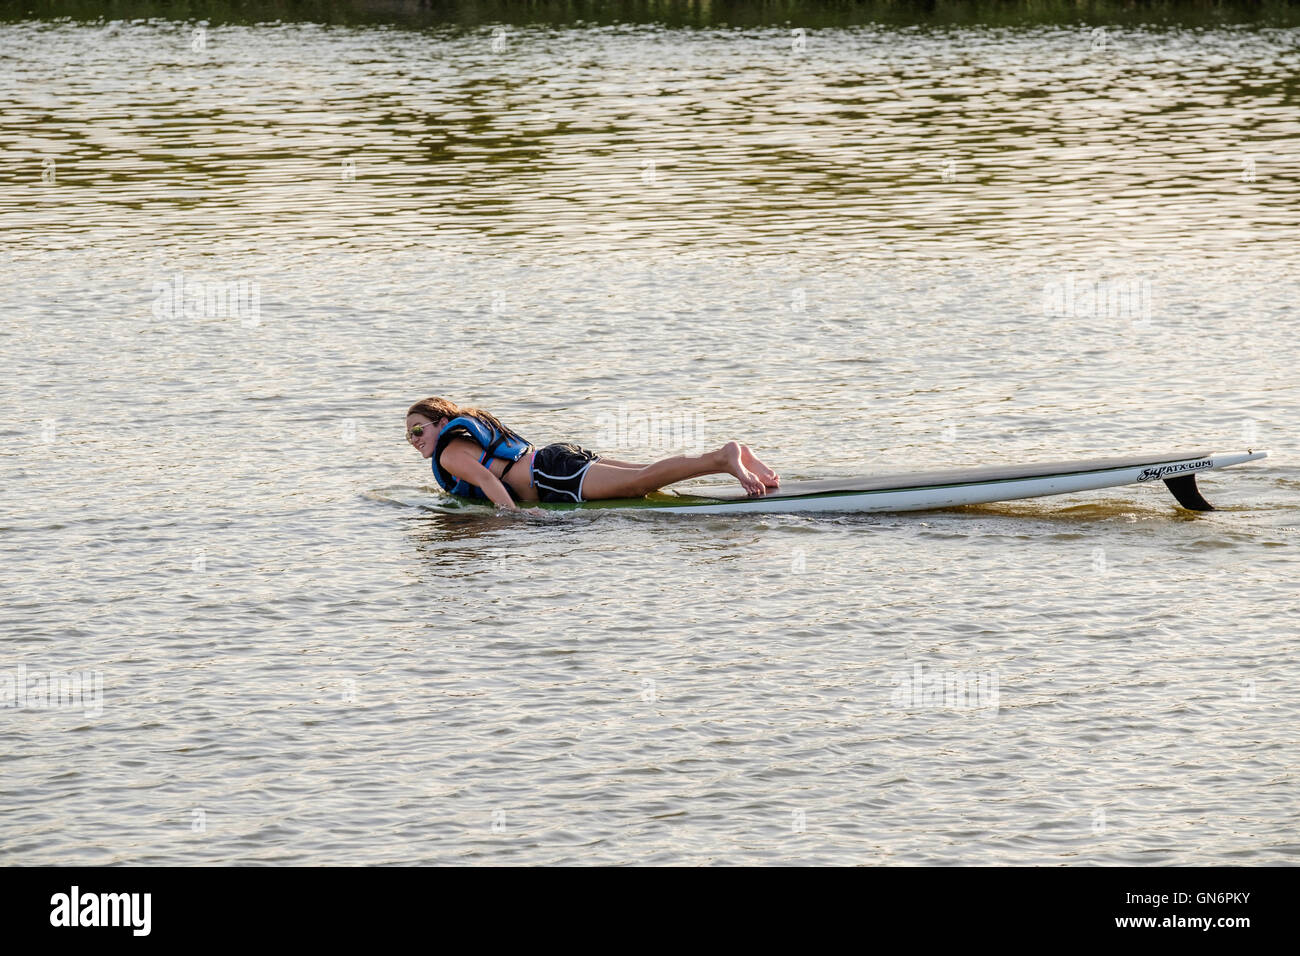 A 25-30 year old Caucasian woman paddles her paddle board with her arms after losing the paddle in a river. Oklahoma, USA. Stock Photo